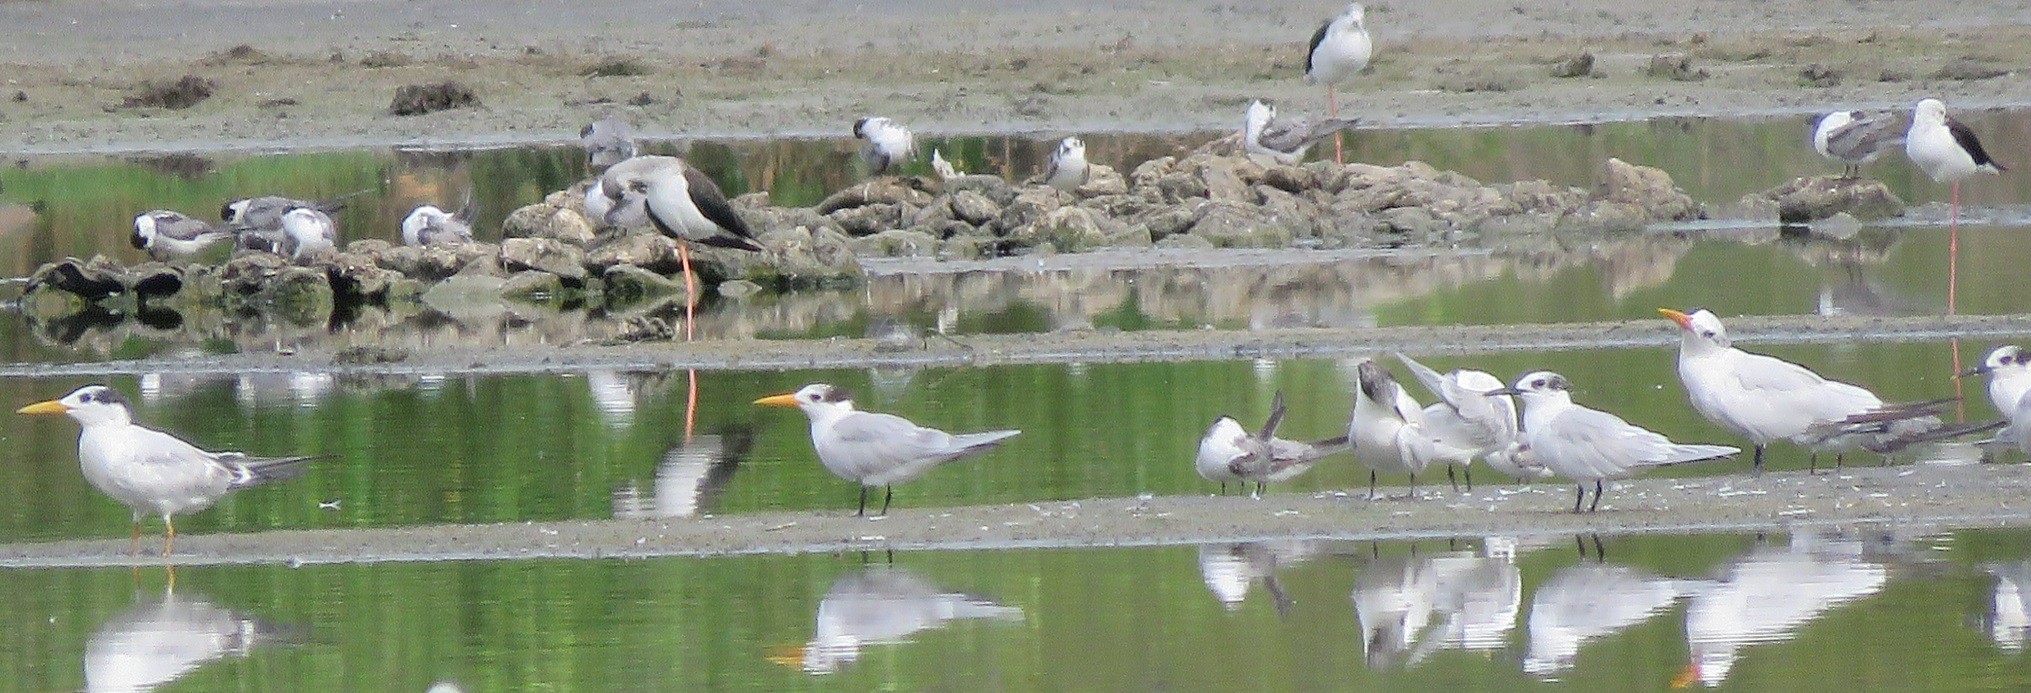 Lesser Crested Tern with other tern species at Technopole